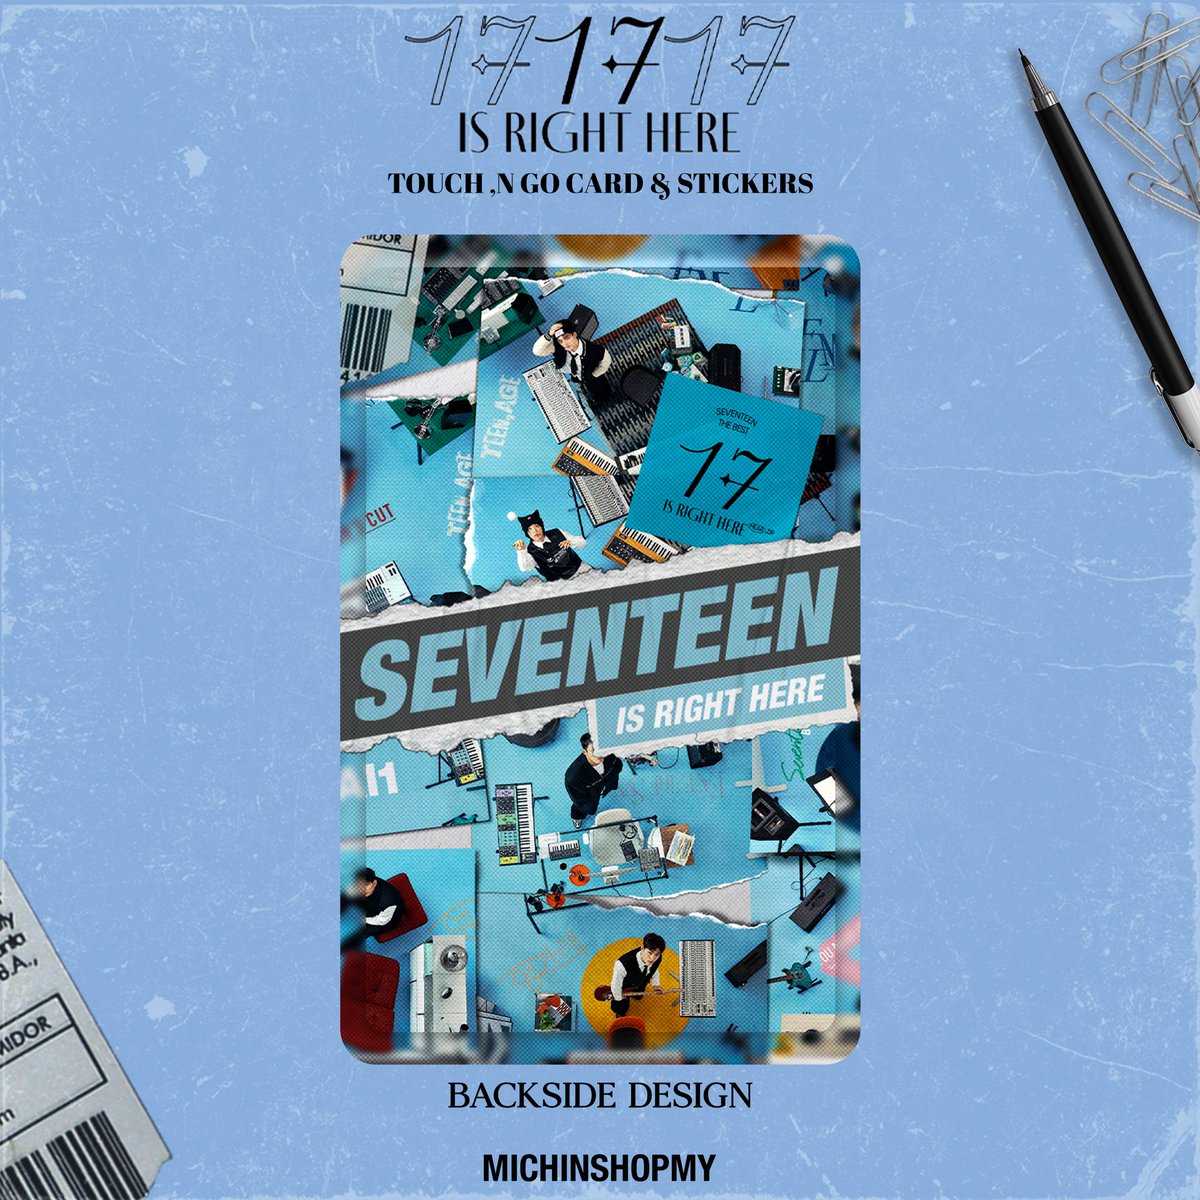 NFC TOUCH 'N GO SEVENTEEN IS RIGHT HERE [PRE-ORDER]

Glitter Finishing

Price: RM28.00 (Card with stickers) | RM18.00 (Stickers only)

⬇️ORDER LINK⬇️
shorturl.at/GS357

Order period: 18/04/2024 - 2/05/2024

#PasarSVT #PasarSVTMY #PasarSeventeen #PasarSeventeenMY